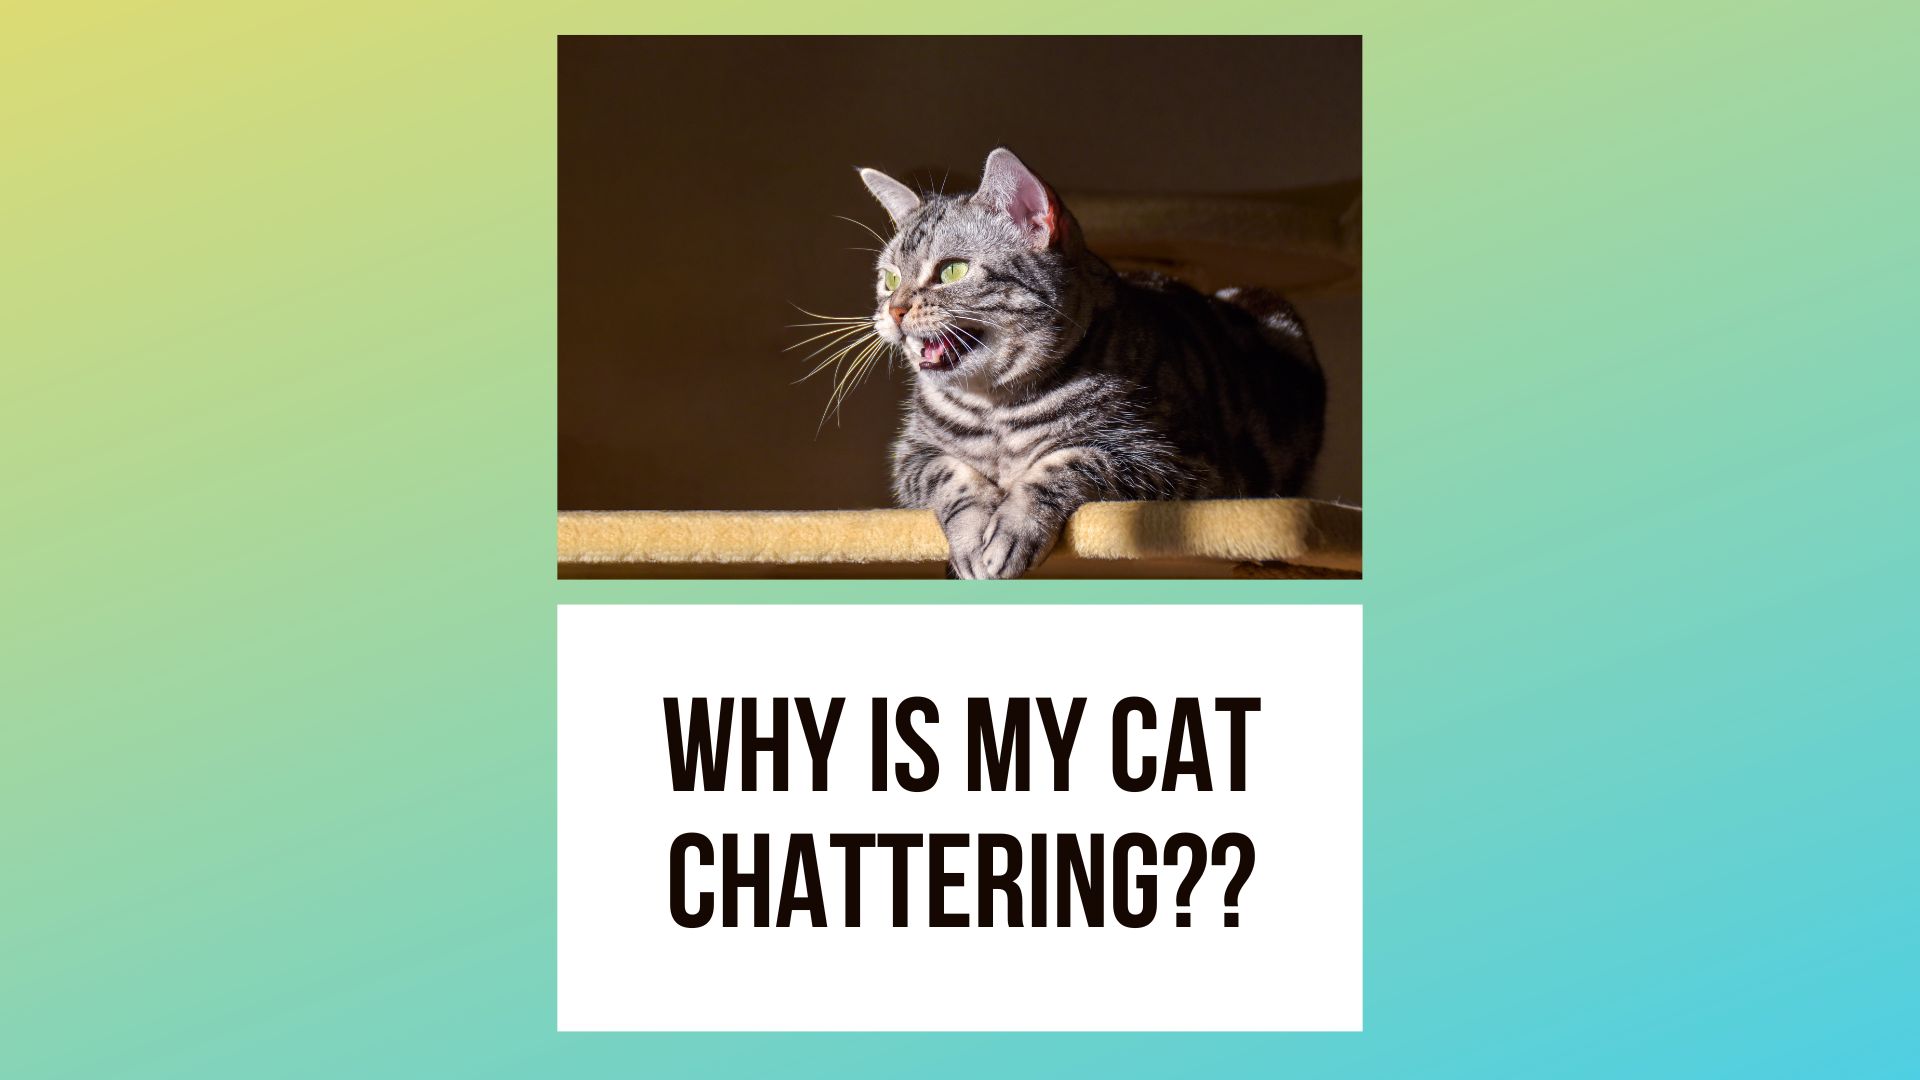 Why Is My Cat Chattering?